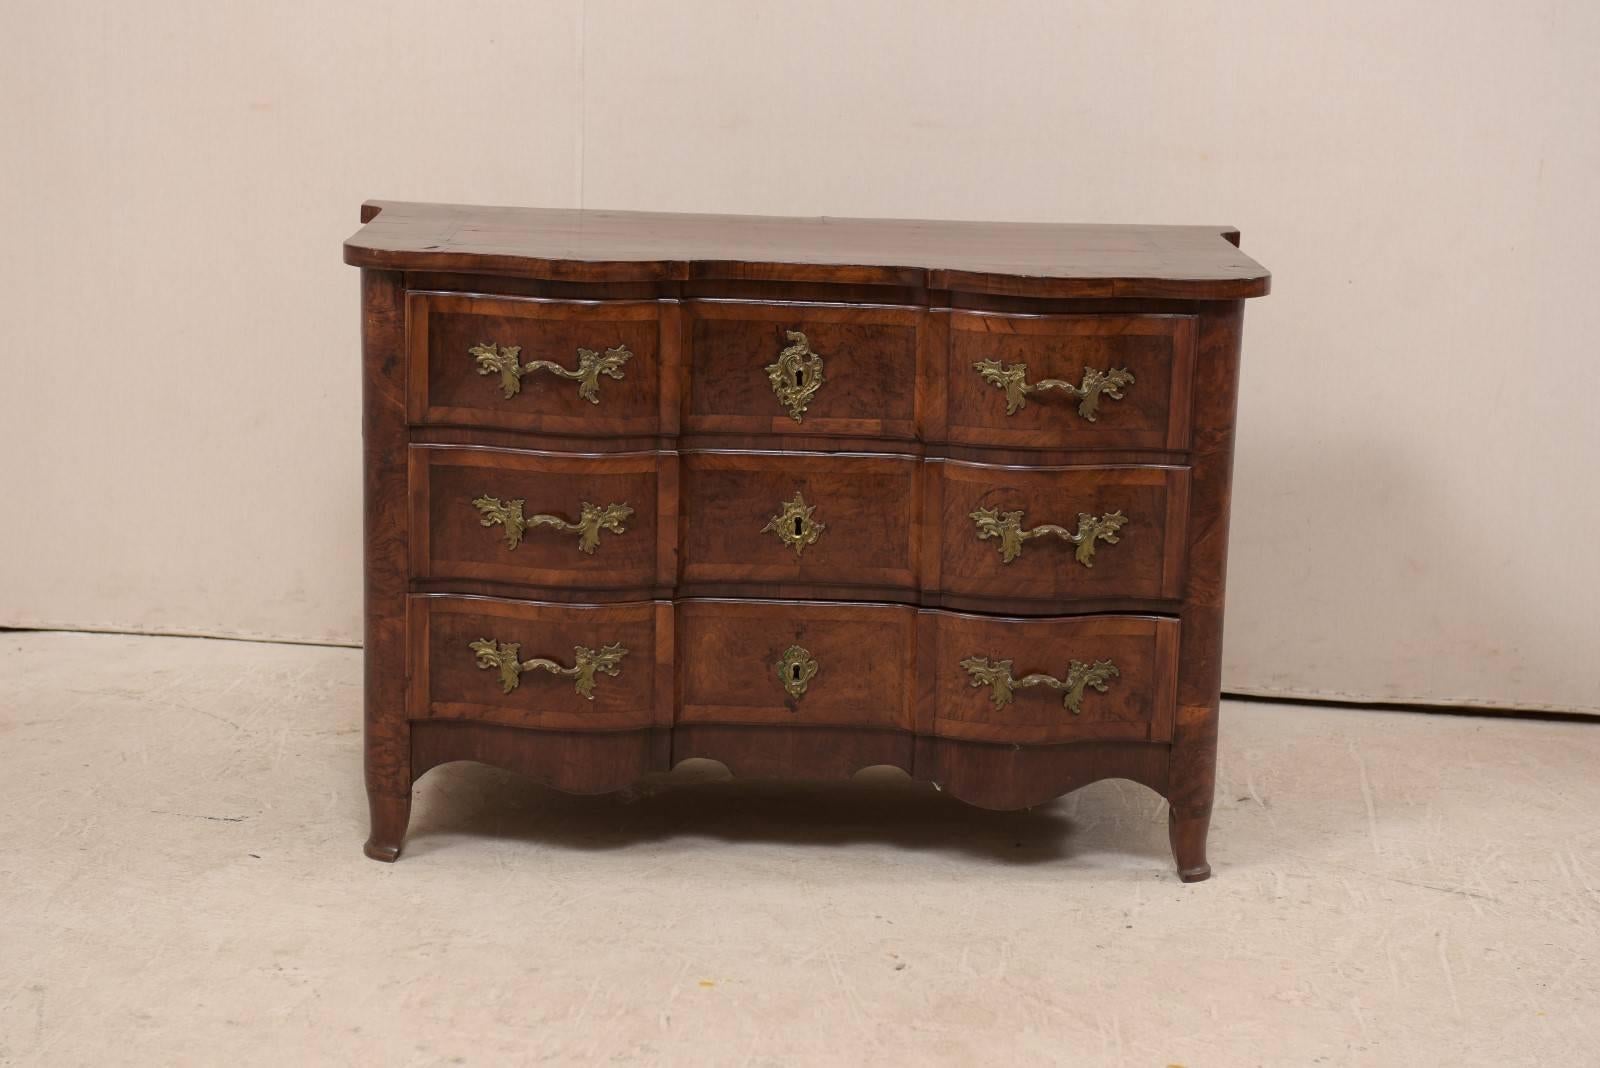 Carved Period Baroque Swedish Wood Chest with Serpentine Front, circa 1725 For Sale